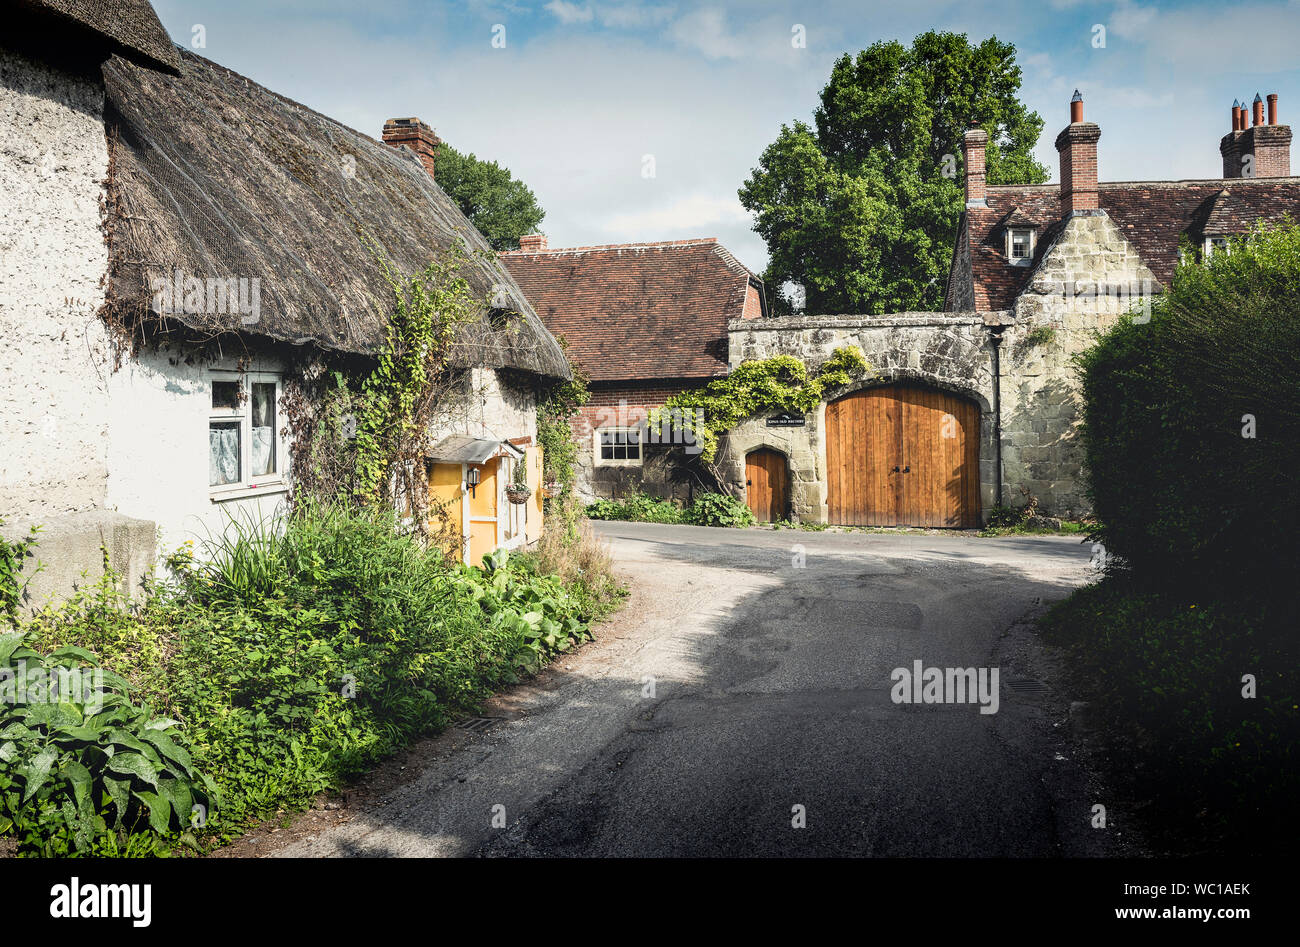 Cottages at Broad Chalke village in Wiltshire England Stock Photo